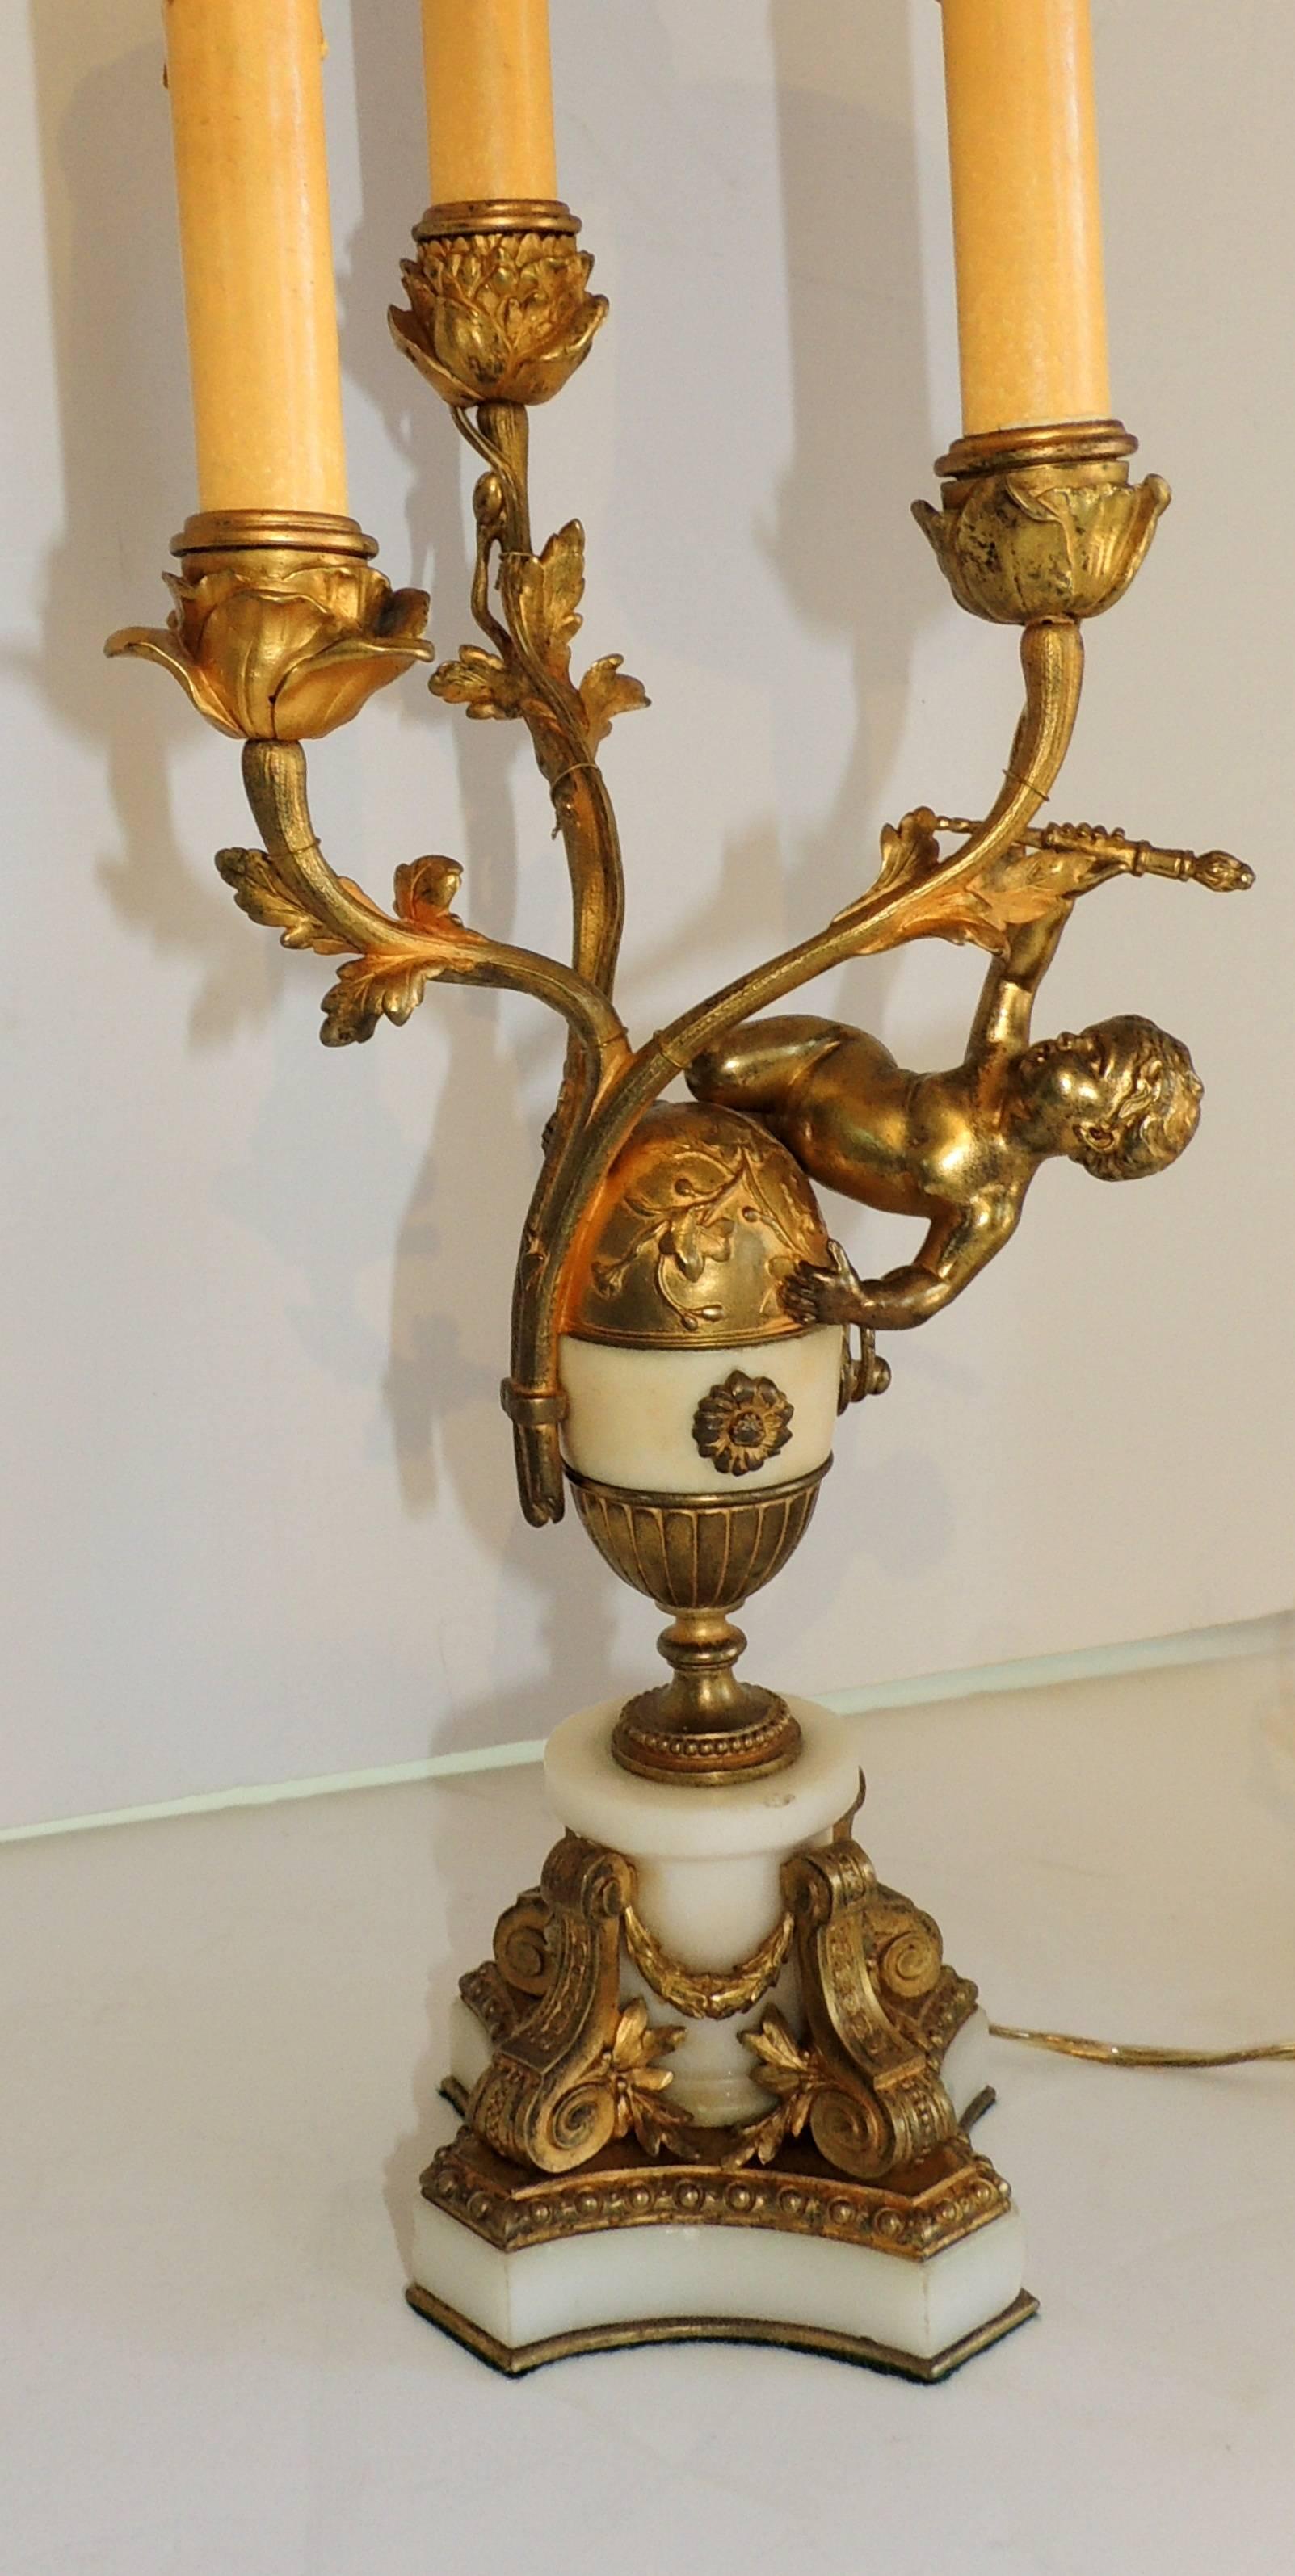 Beautiful French Dore Bronze Marble Cherub Ormolu-Mounted Candelabra Lamps, Pair In Good Condition For Sale In Roslyn, NY